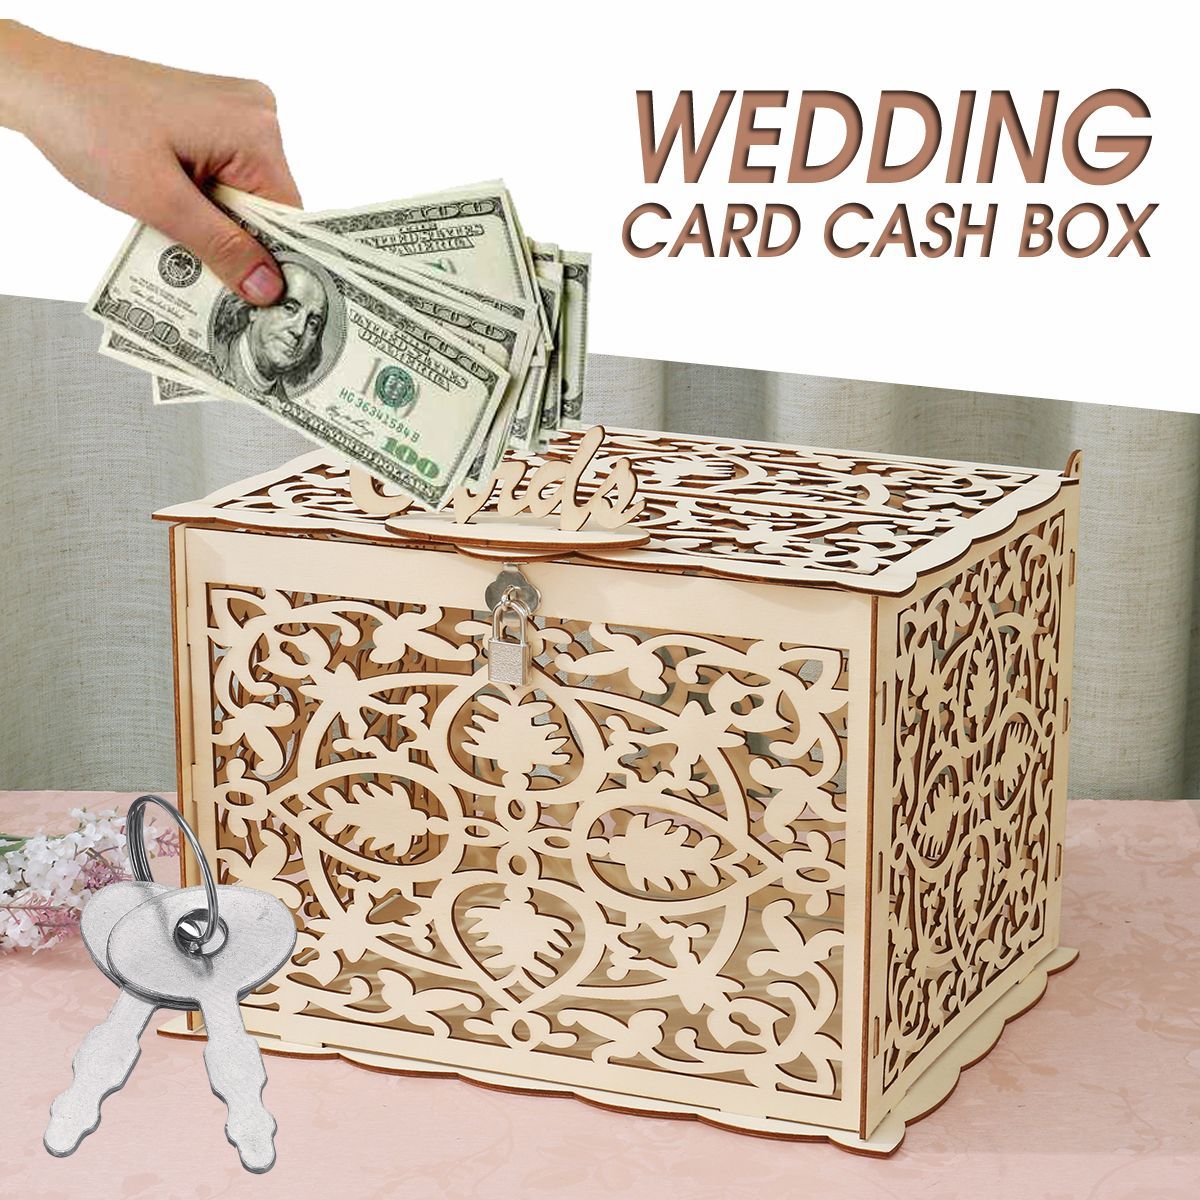 Wooden-Wedding-Card-Post-Box-with-Lock-Collection-Gift-Card-Boxes-Weddings-Decor-Supplies-1507983